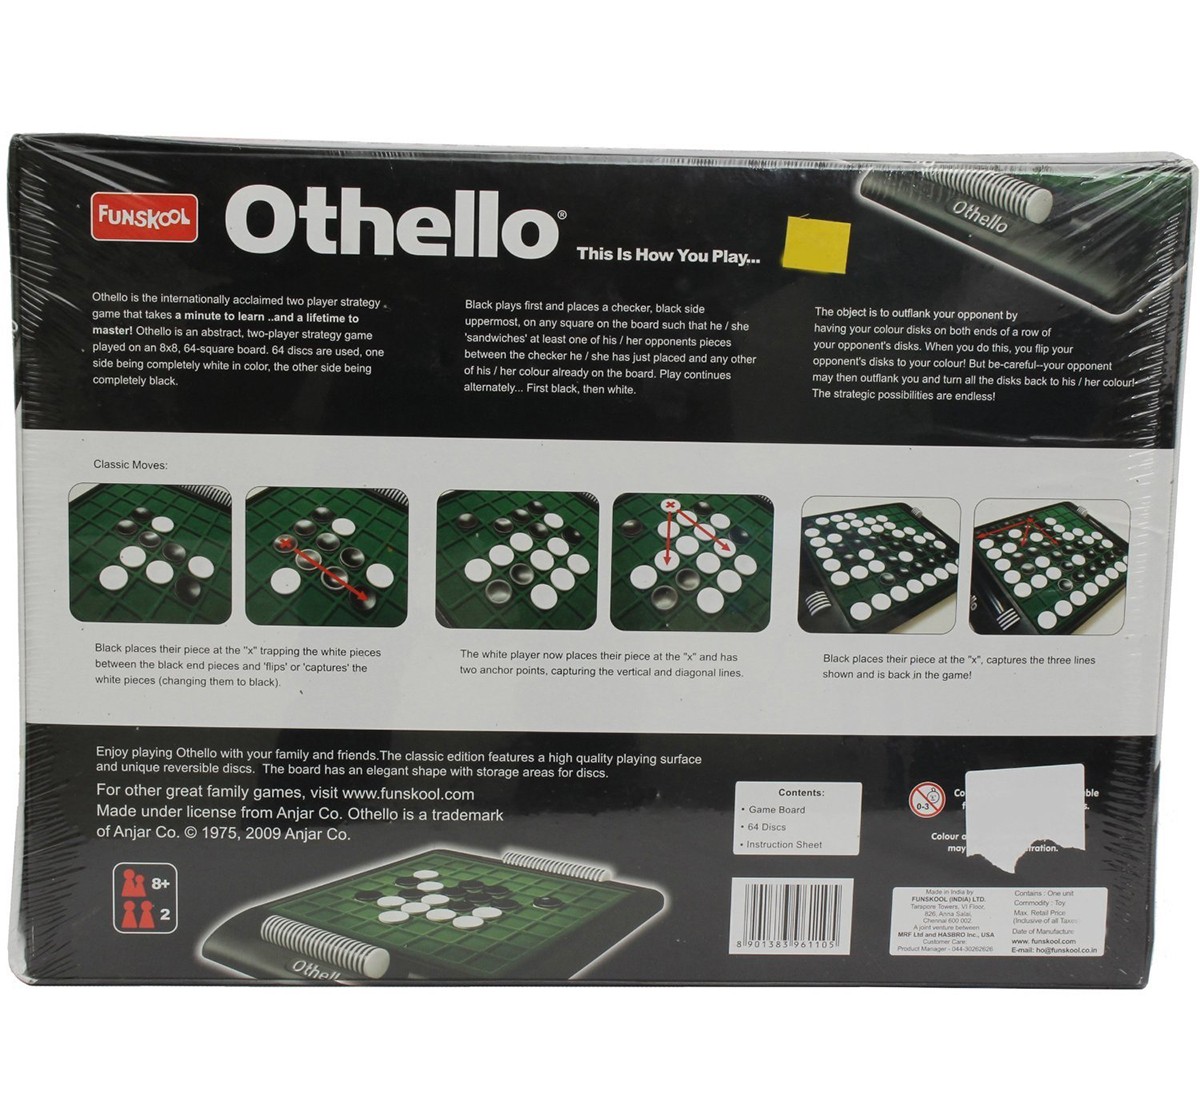 Funskool Othello Board Games for Kids age 8Y+